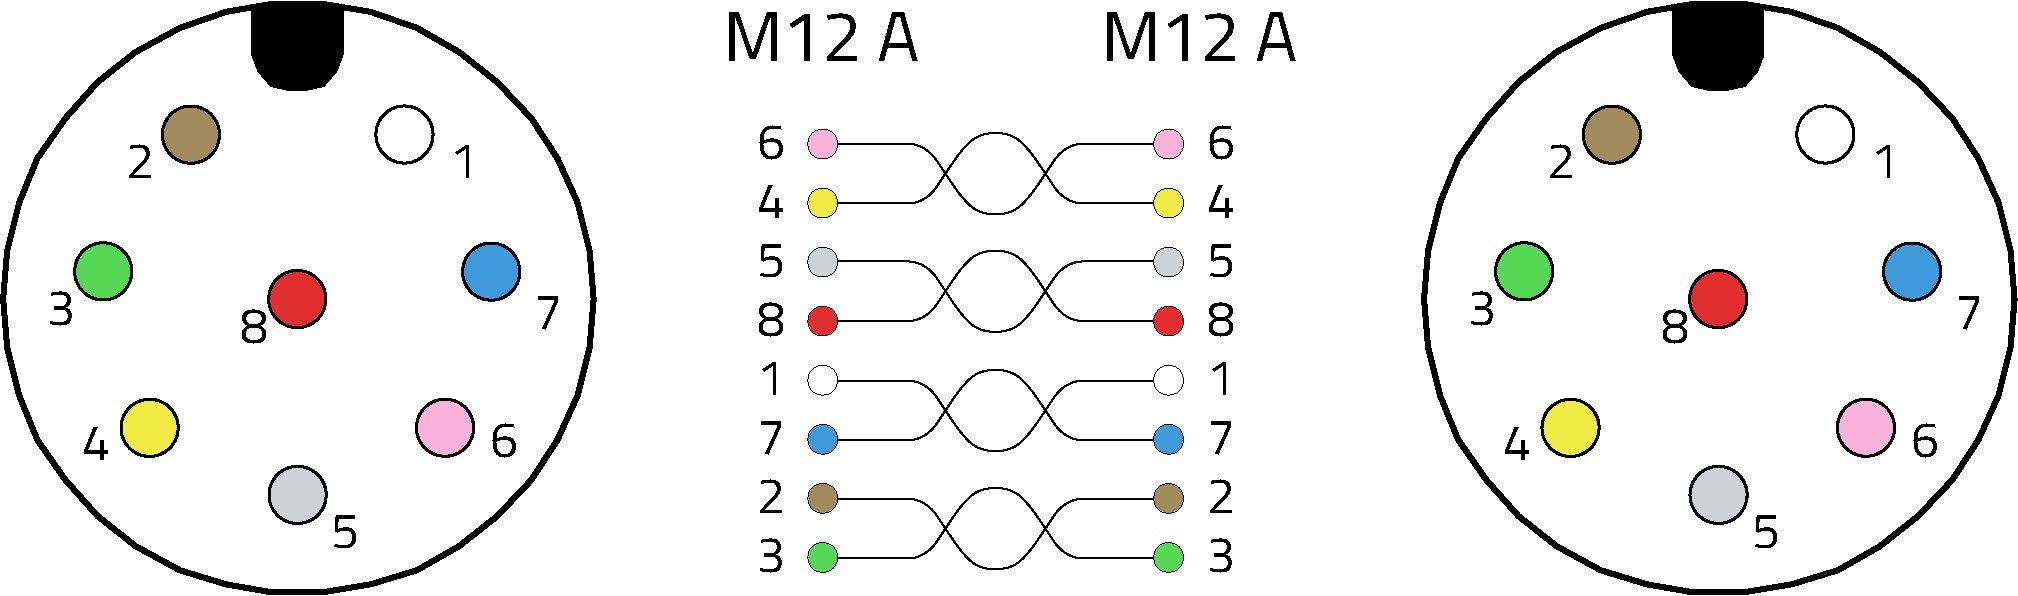 This is the recommended pin assignment from M12-A to M12-A for 10BASE-T transmission.